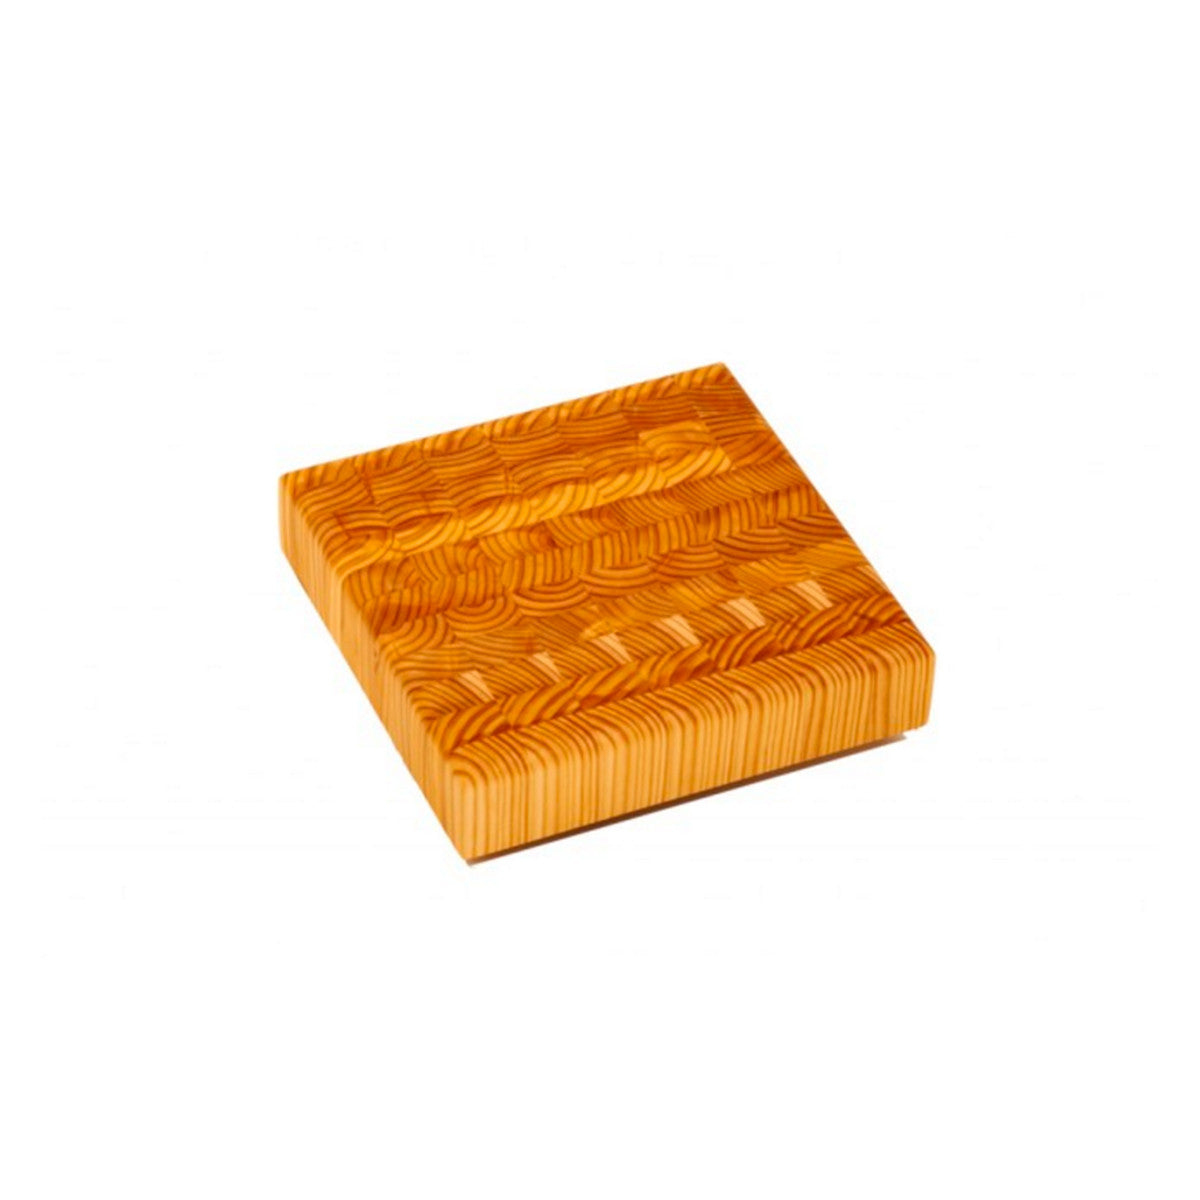 Large Wood Tiger stripe buffet board is a beautifully crafted serving piece. 